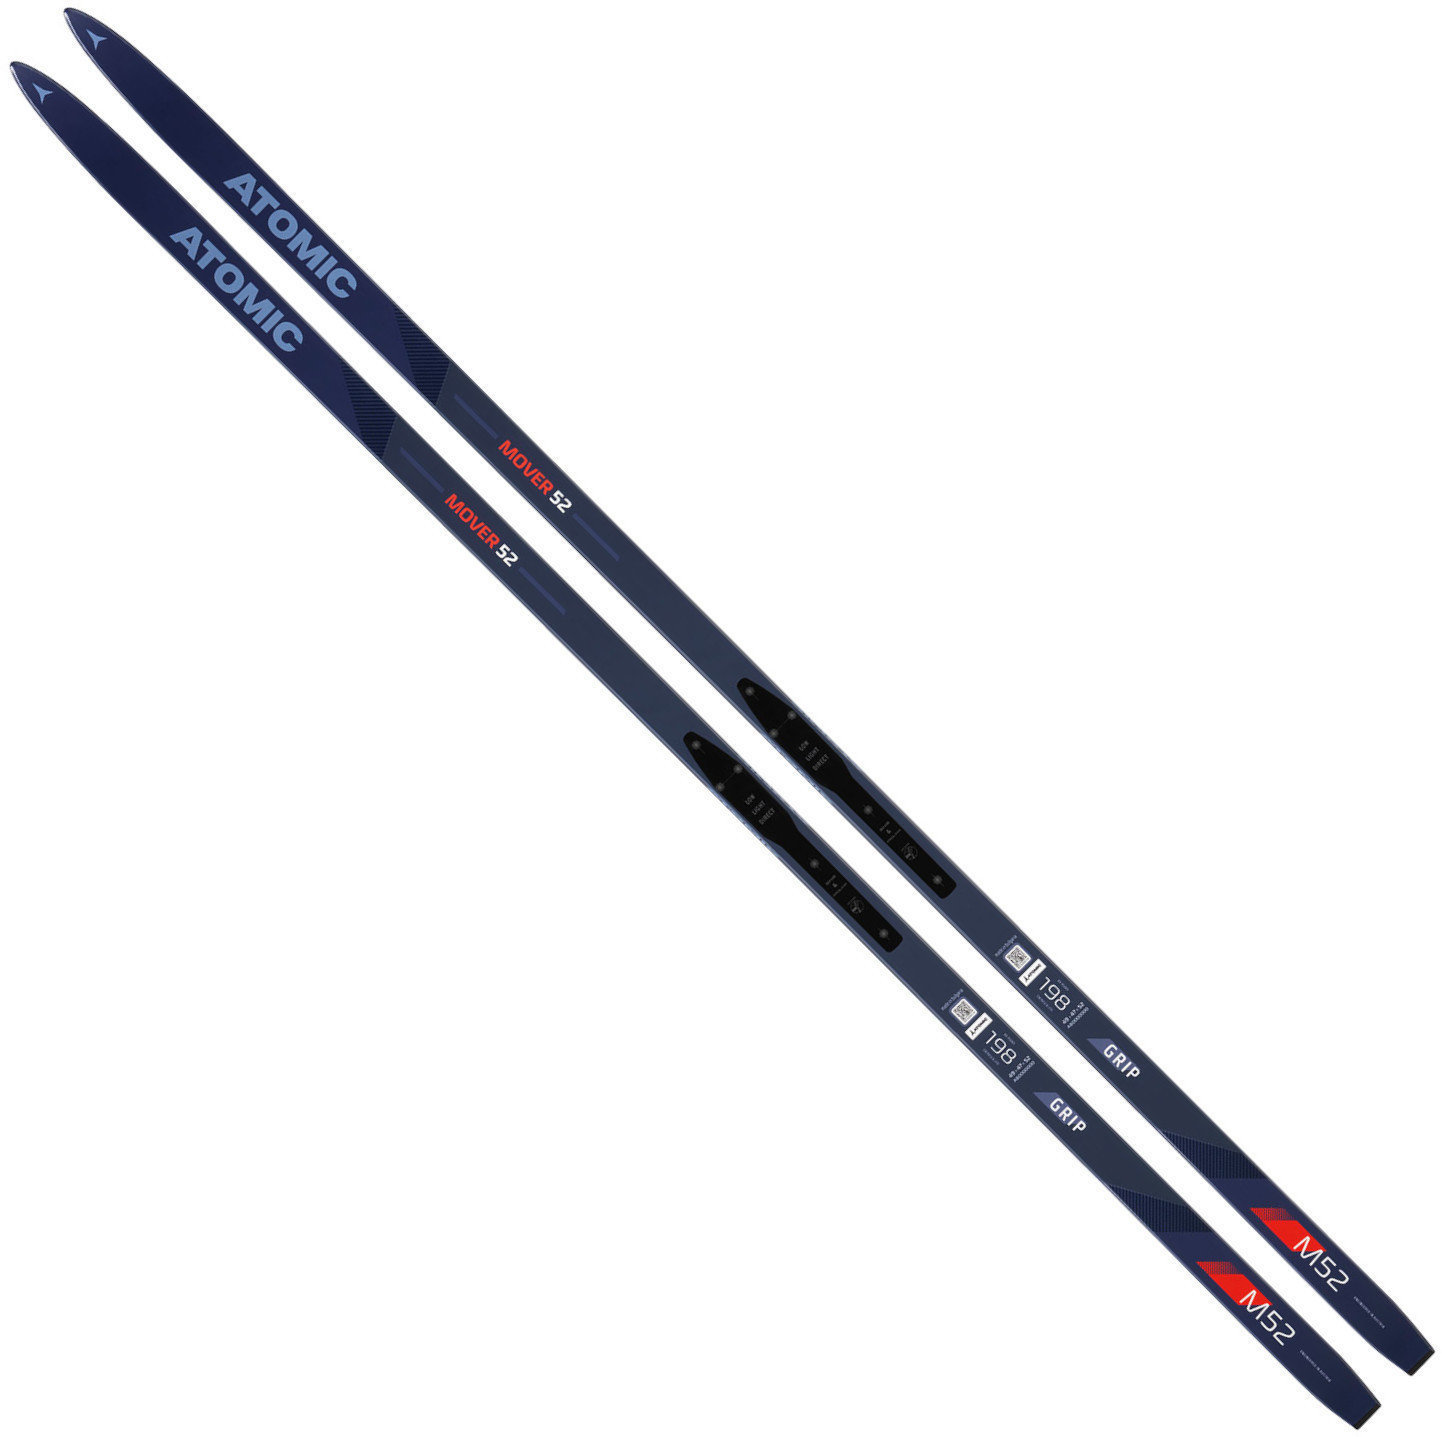 Cross-country Skis Atomic Mover 52 Grip Blue/Light Blue/Red 191 cm 18/19